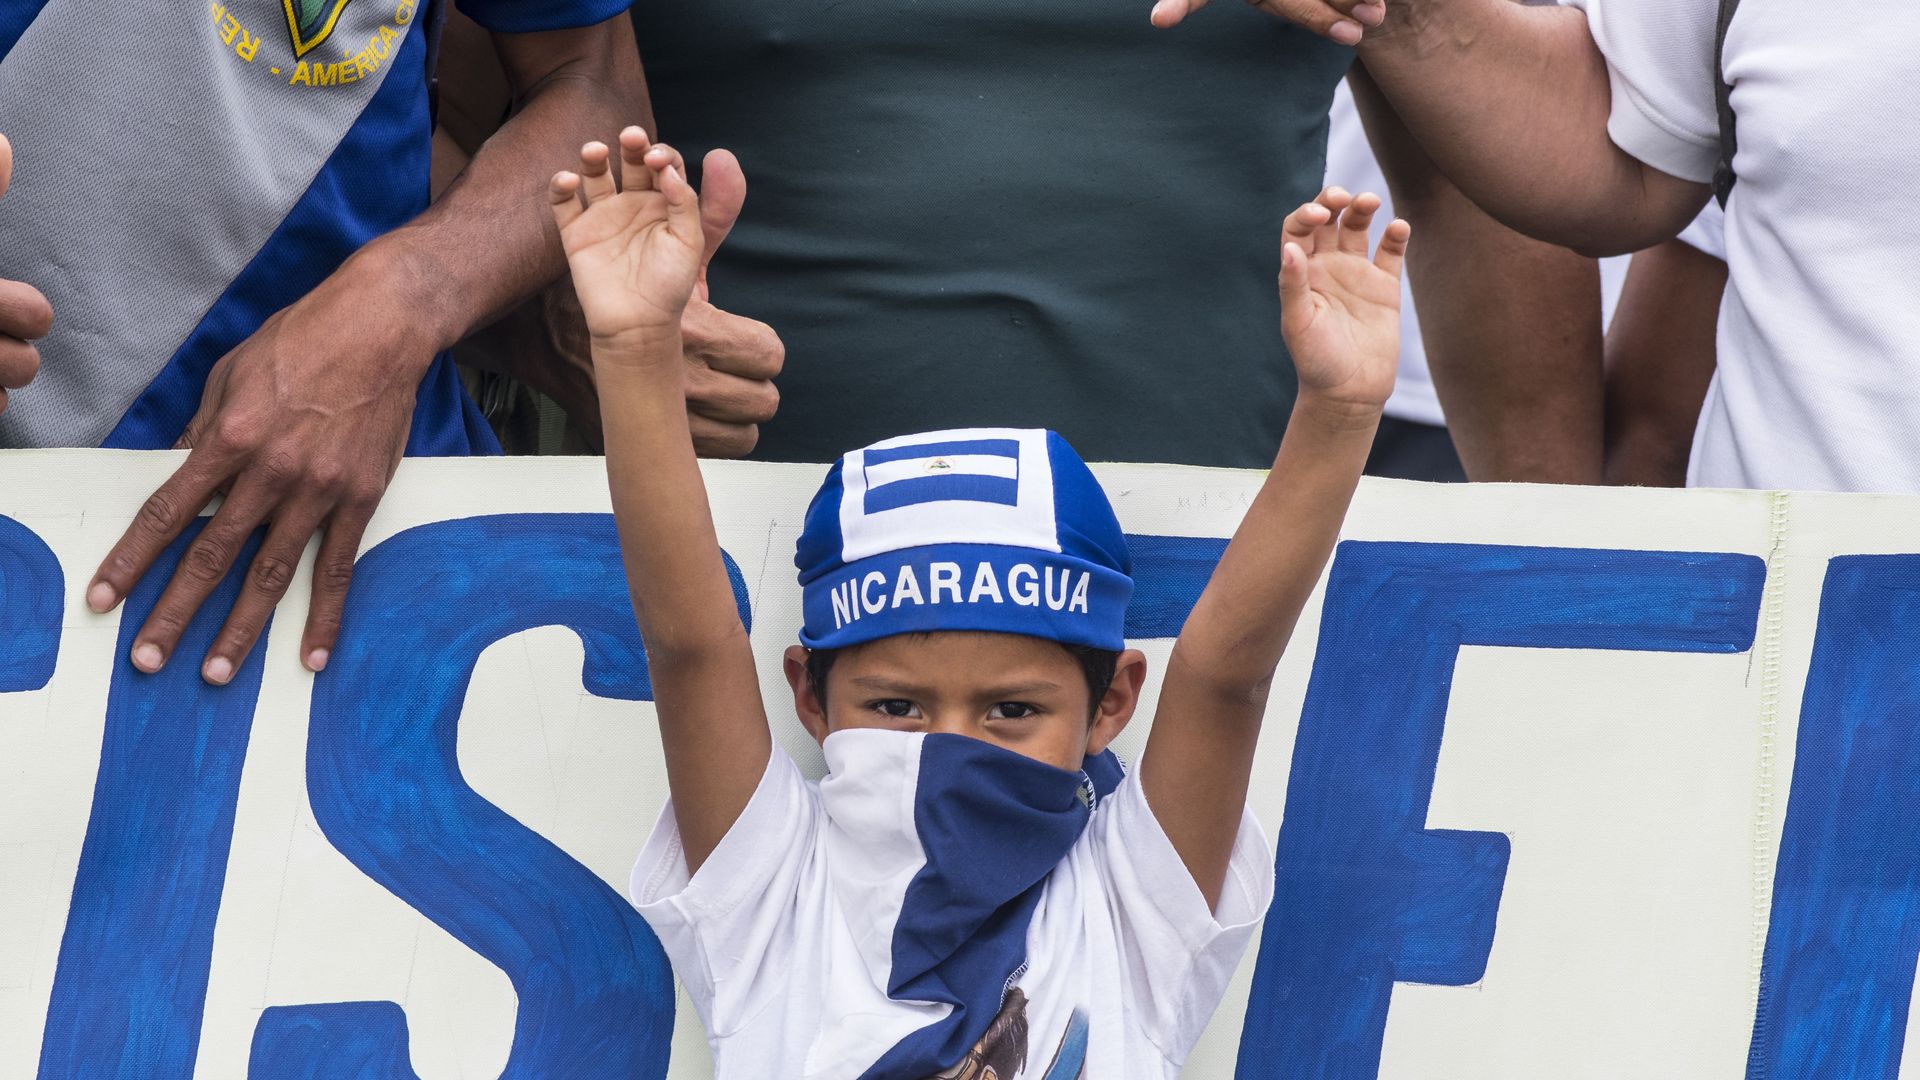 Nicaraguans demonstrate outside the Nicaraguan Embassy in San Jose, Costa Rica on January 12, 2019, to protest against the arrest of opposition journalists.